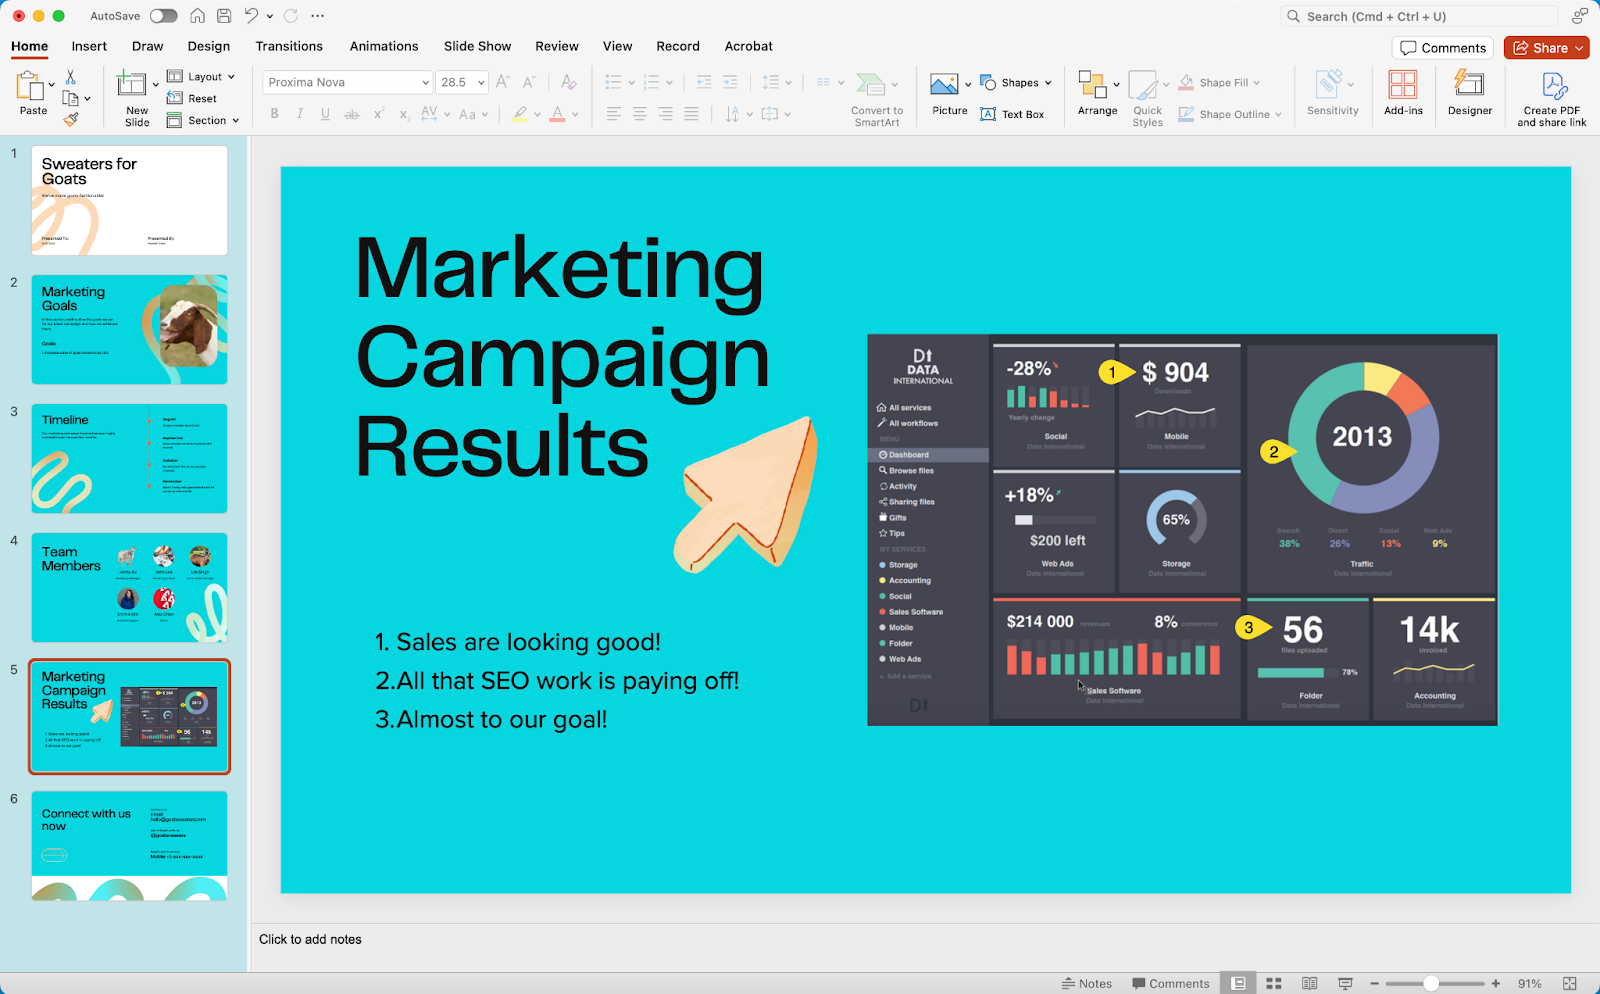 PowerPoint presentation with a screenshot showing campaign results